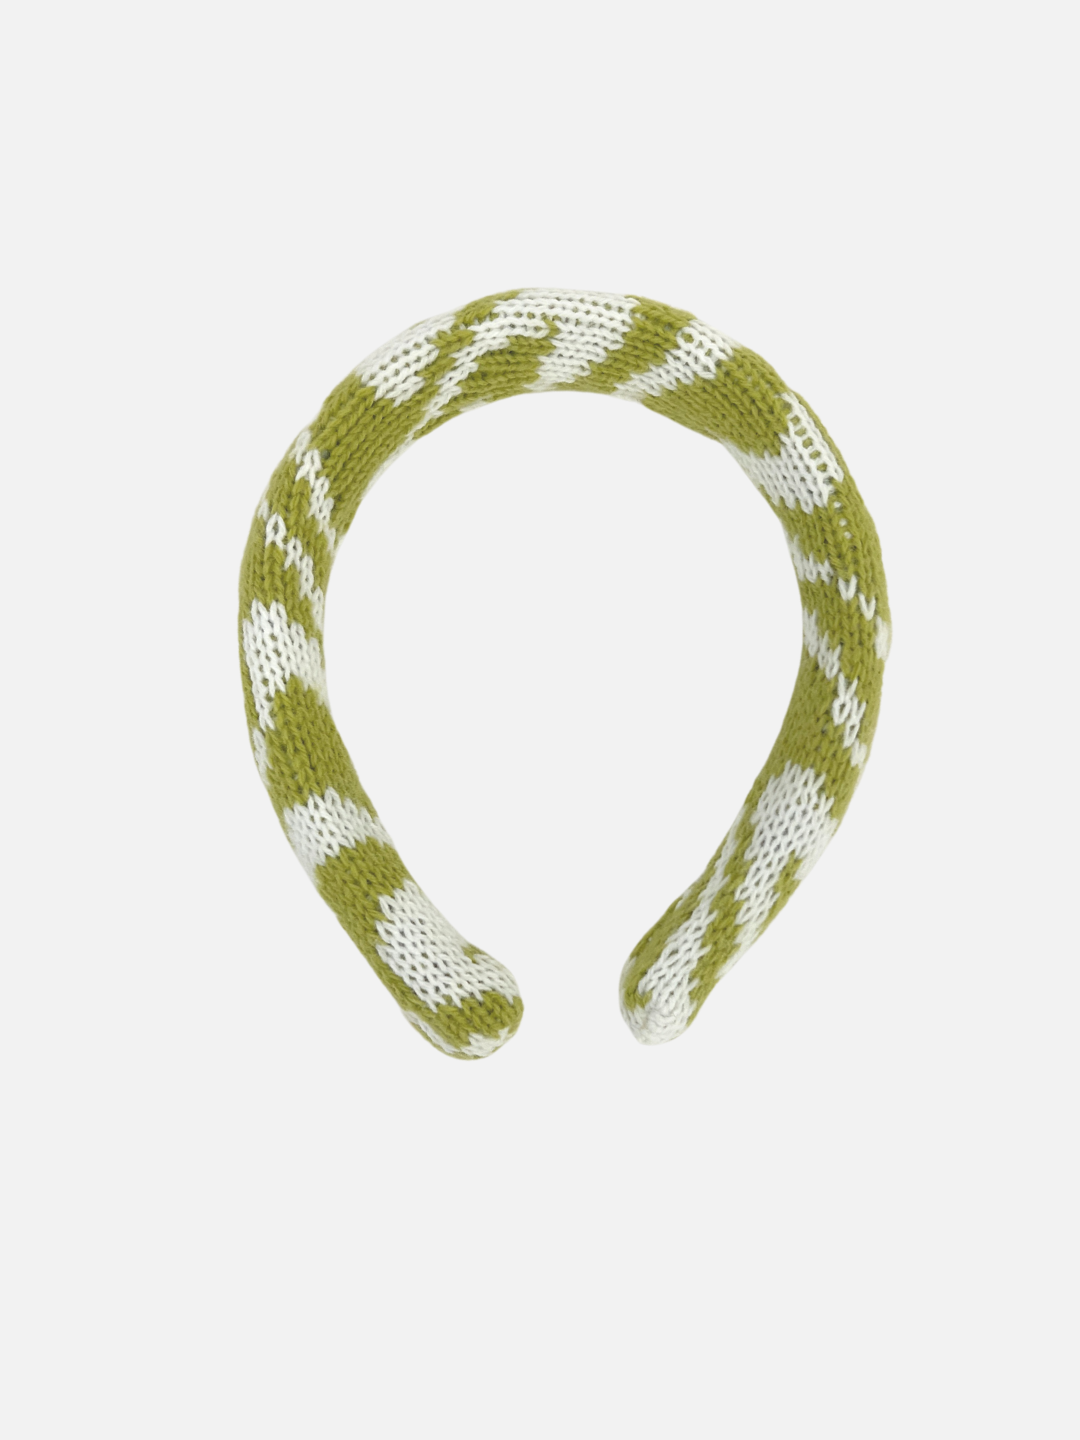 A kids' knitted headband in swirls of pale green and white